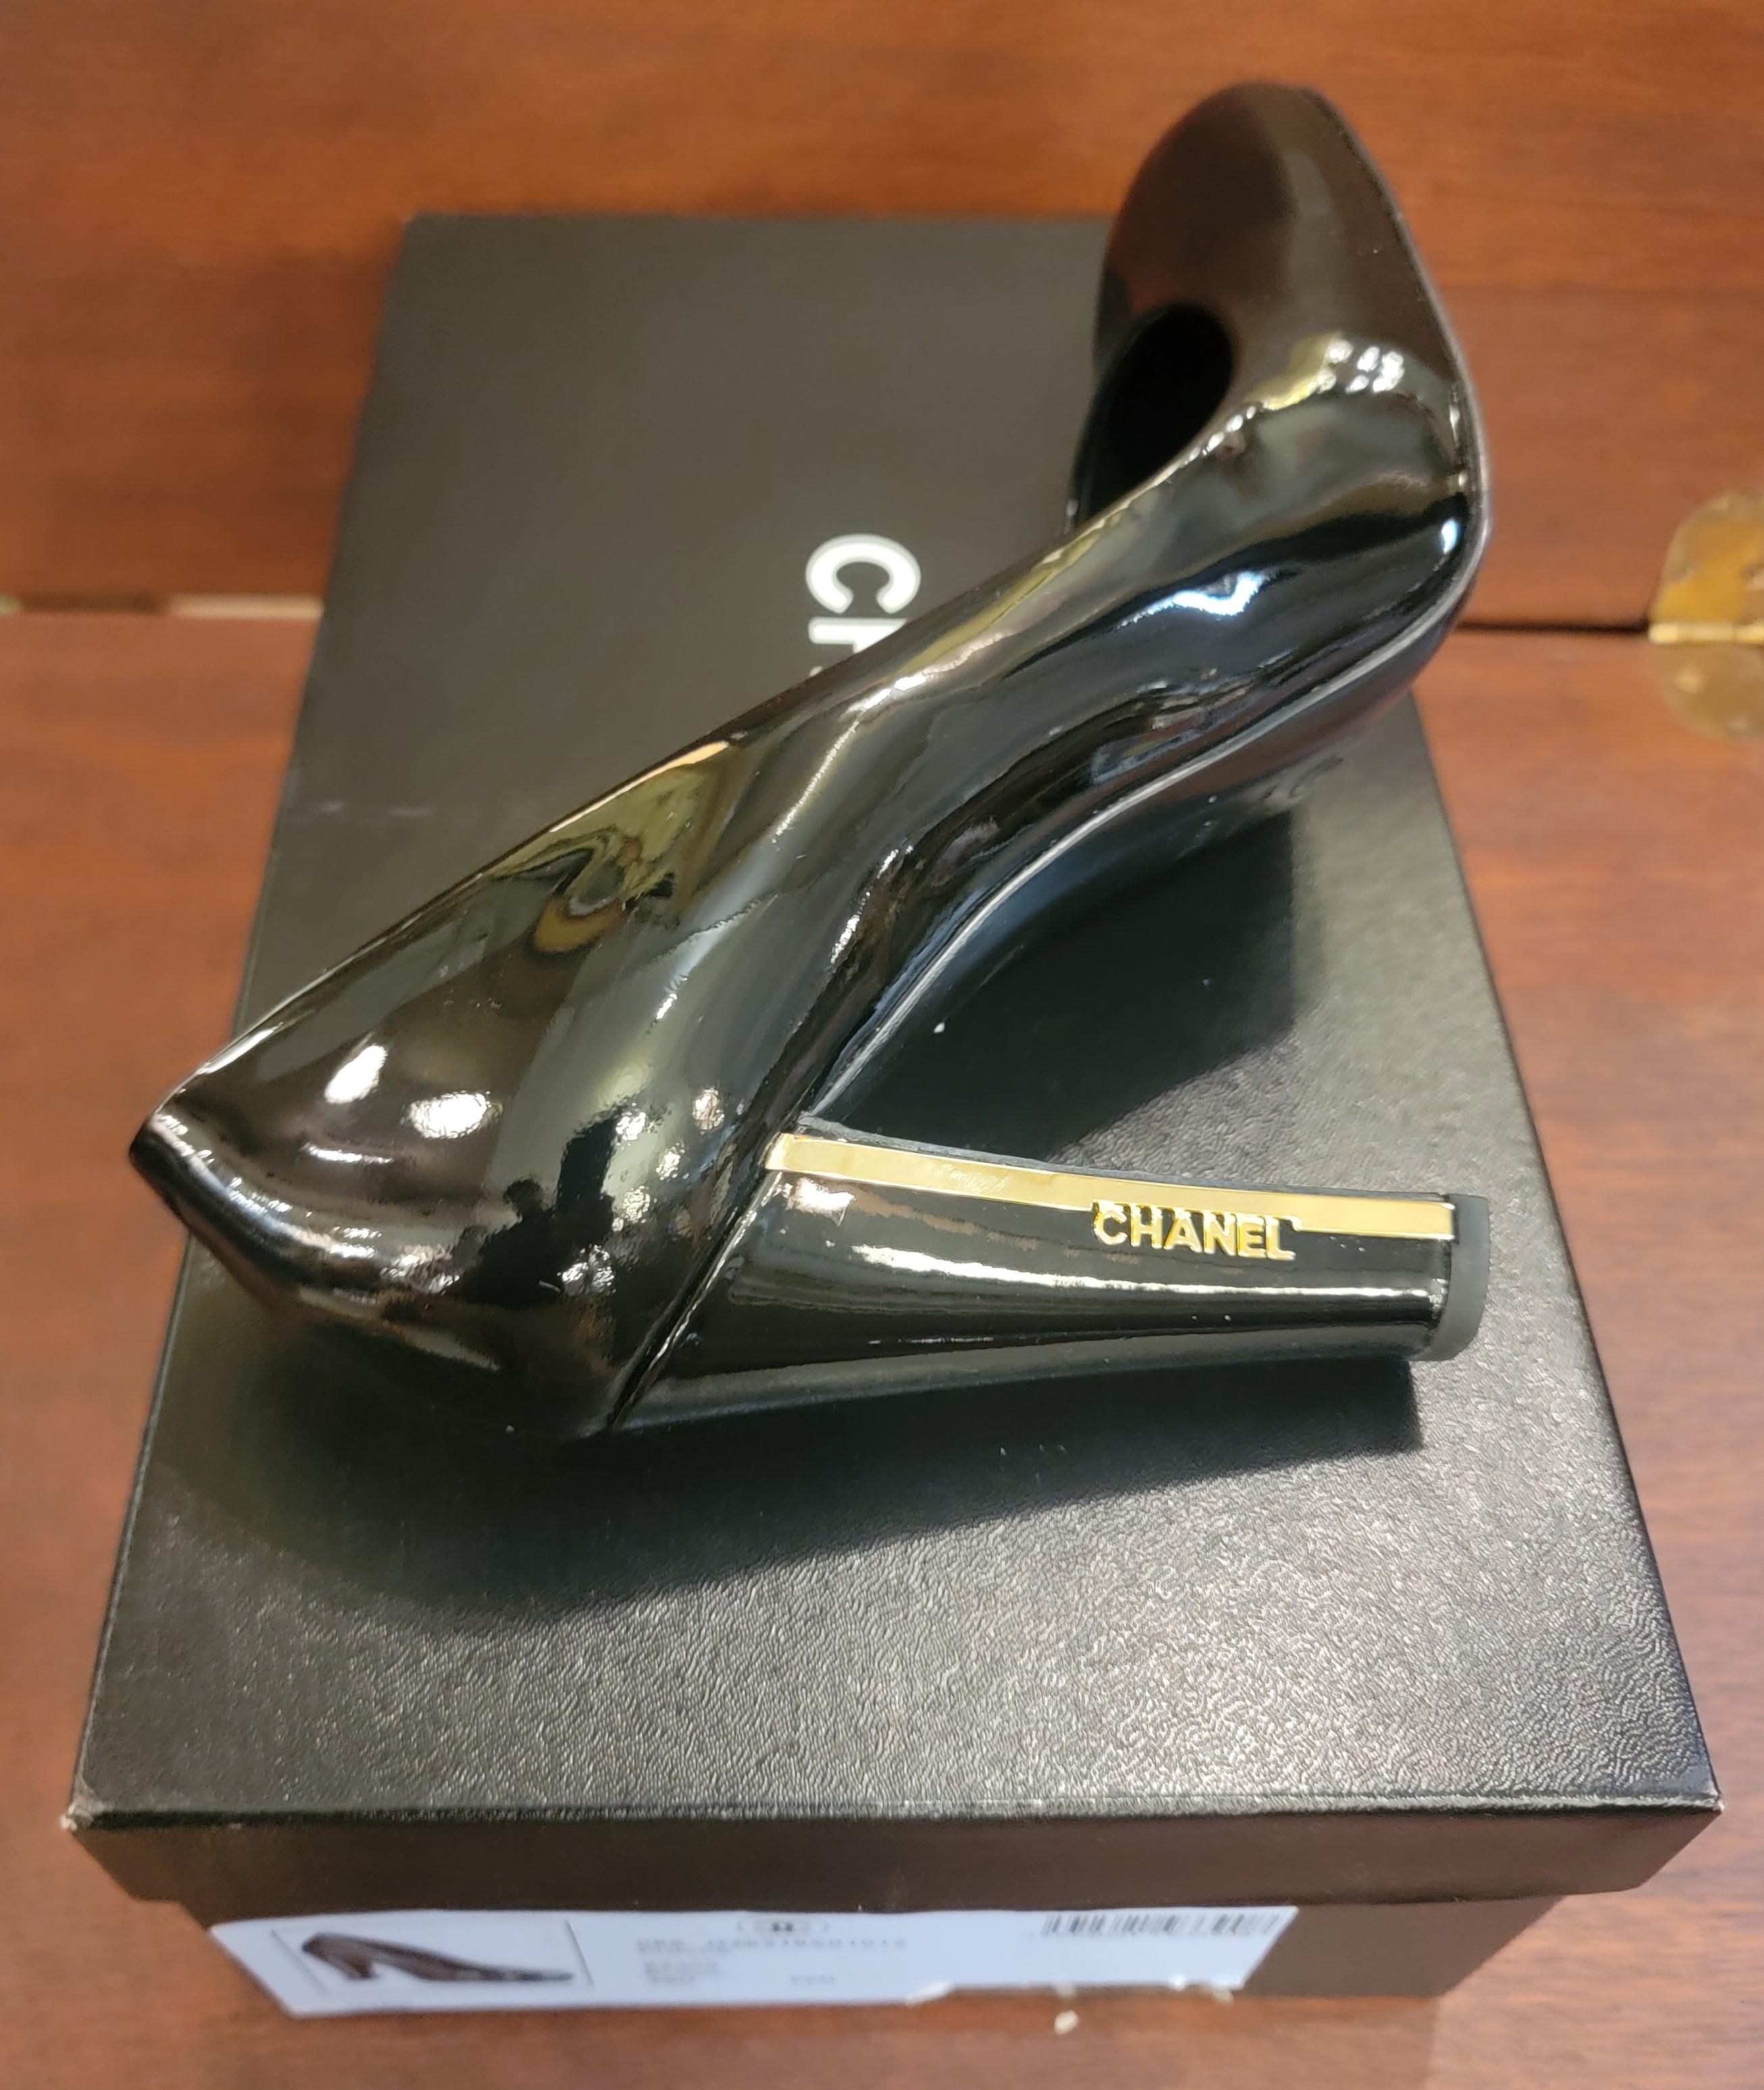 Authentic Brand New Chanel size 39.5 High Heel Shoes with Chanel Gold Accent en vente 2